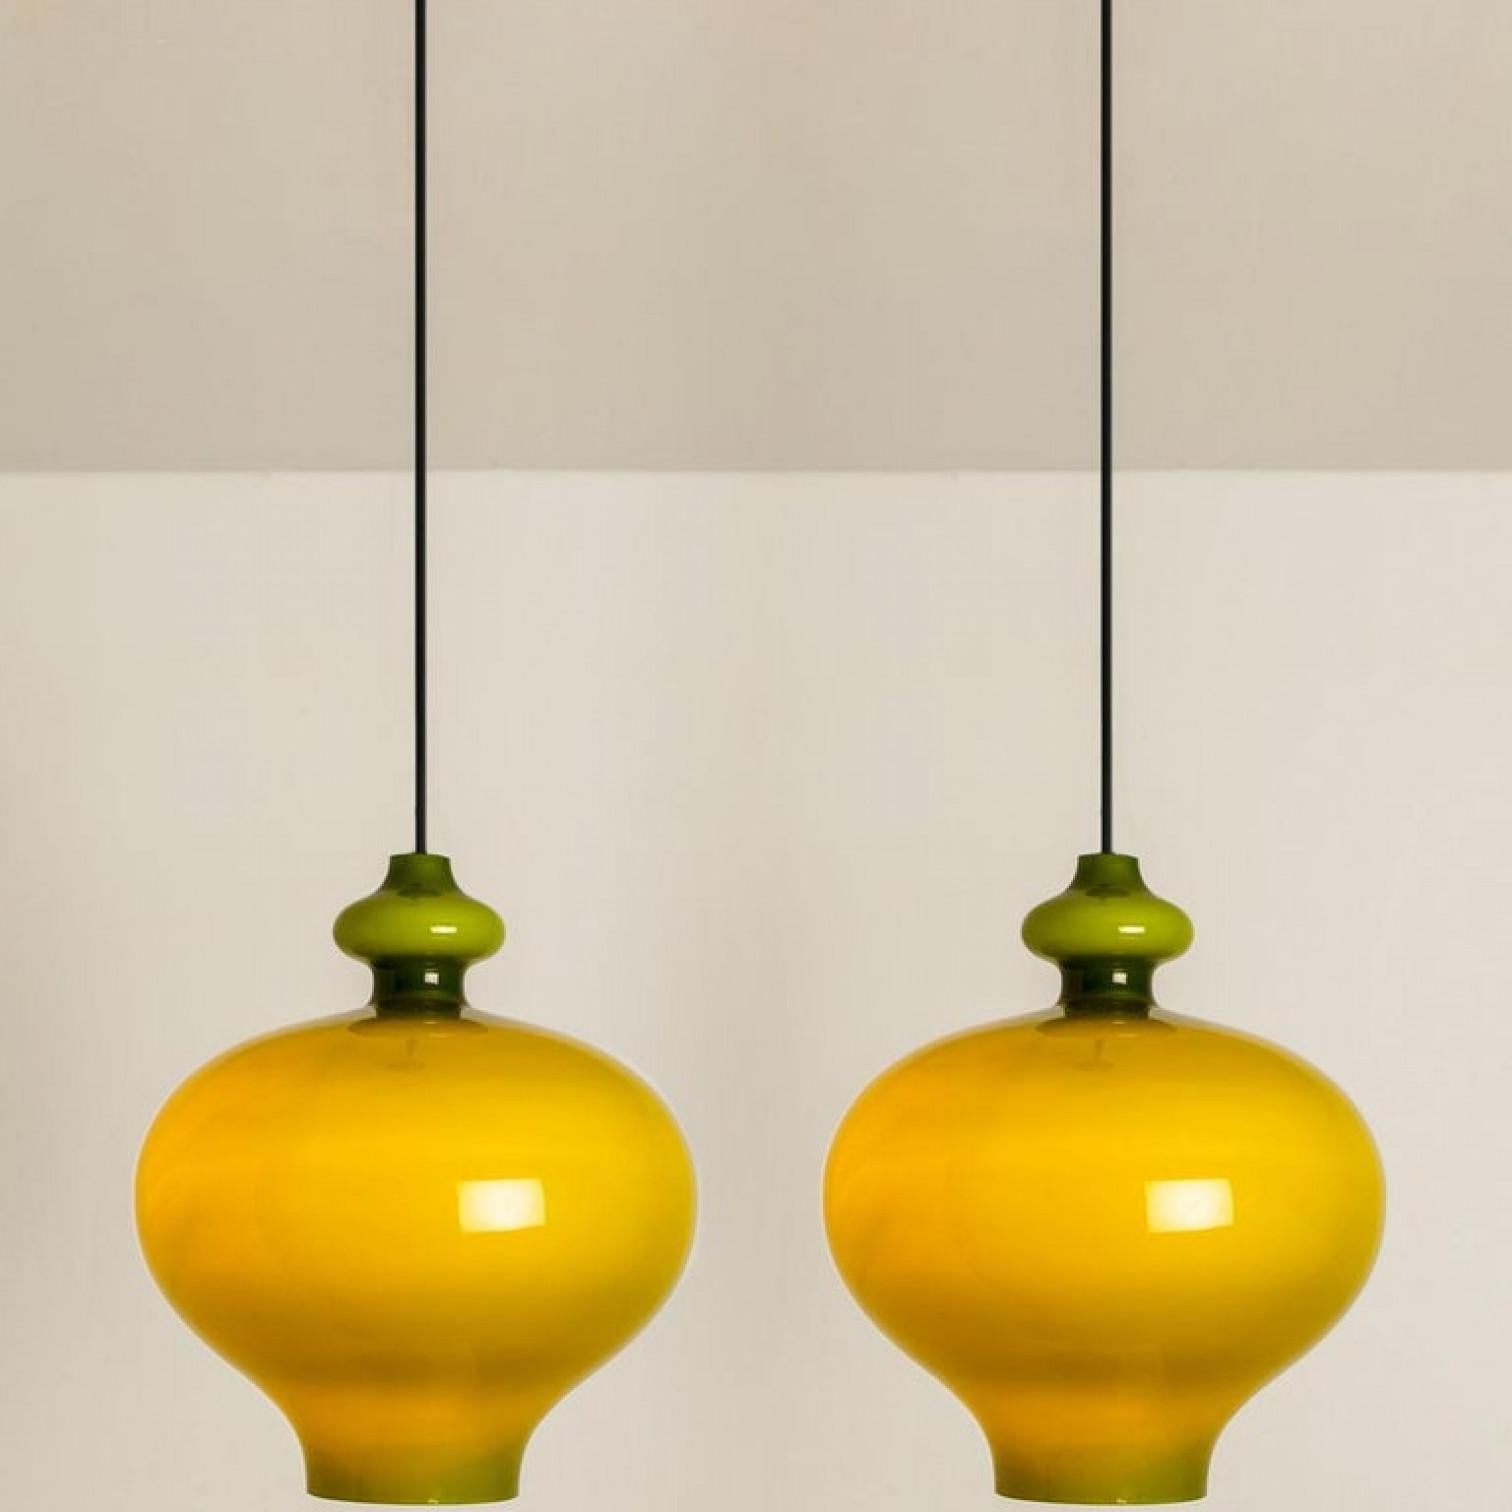 Pair of Hans-Agne Jakobsson for Staff Green Glass Pendant Lights, 1960 For Sale 6